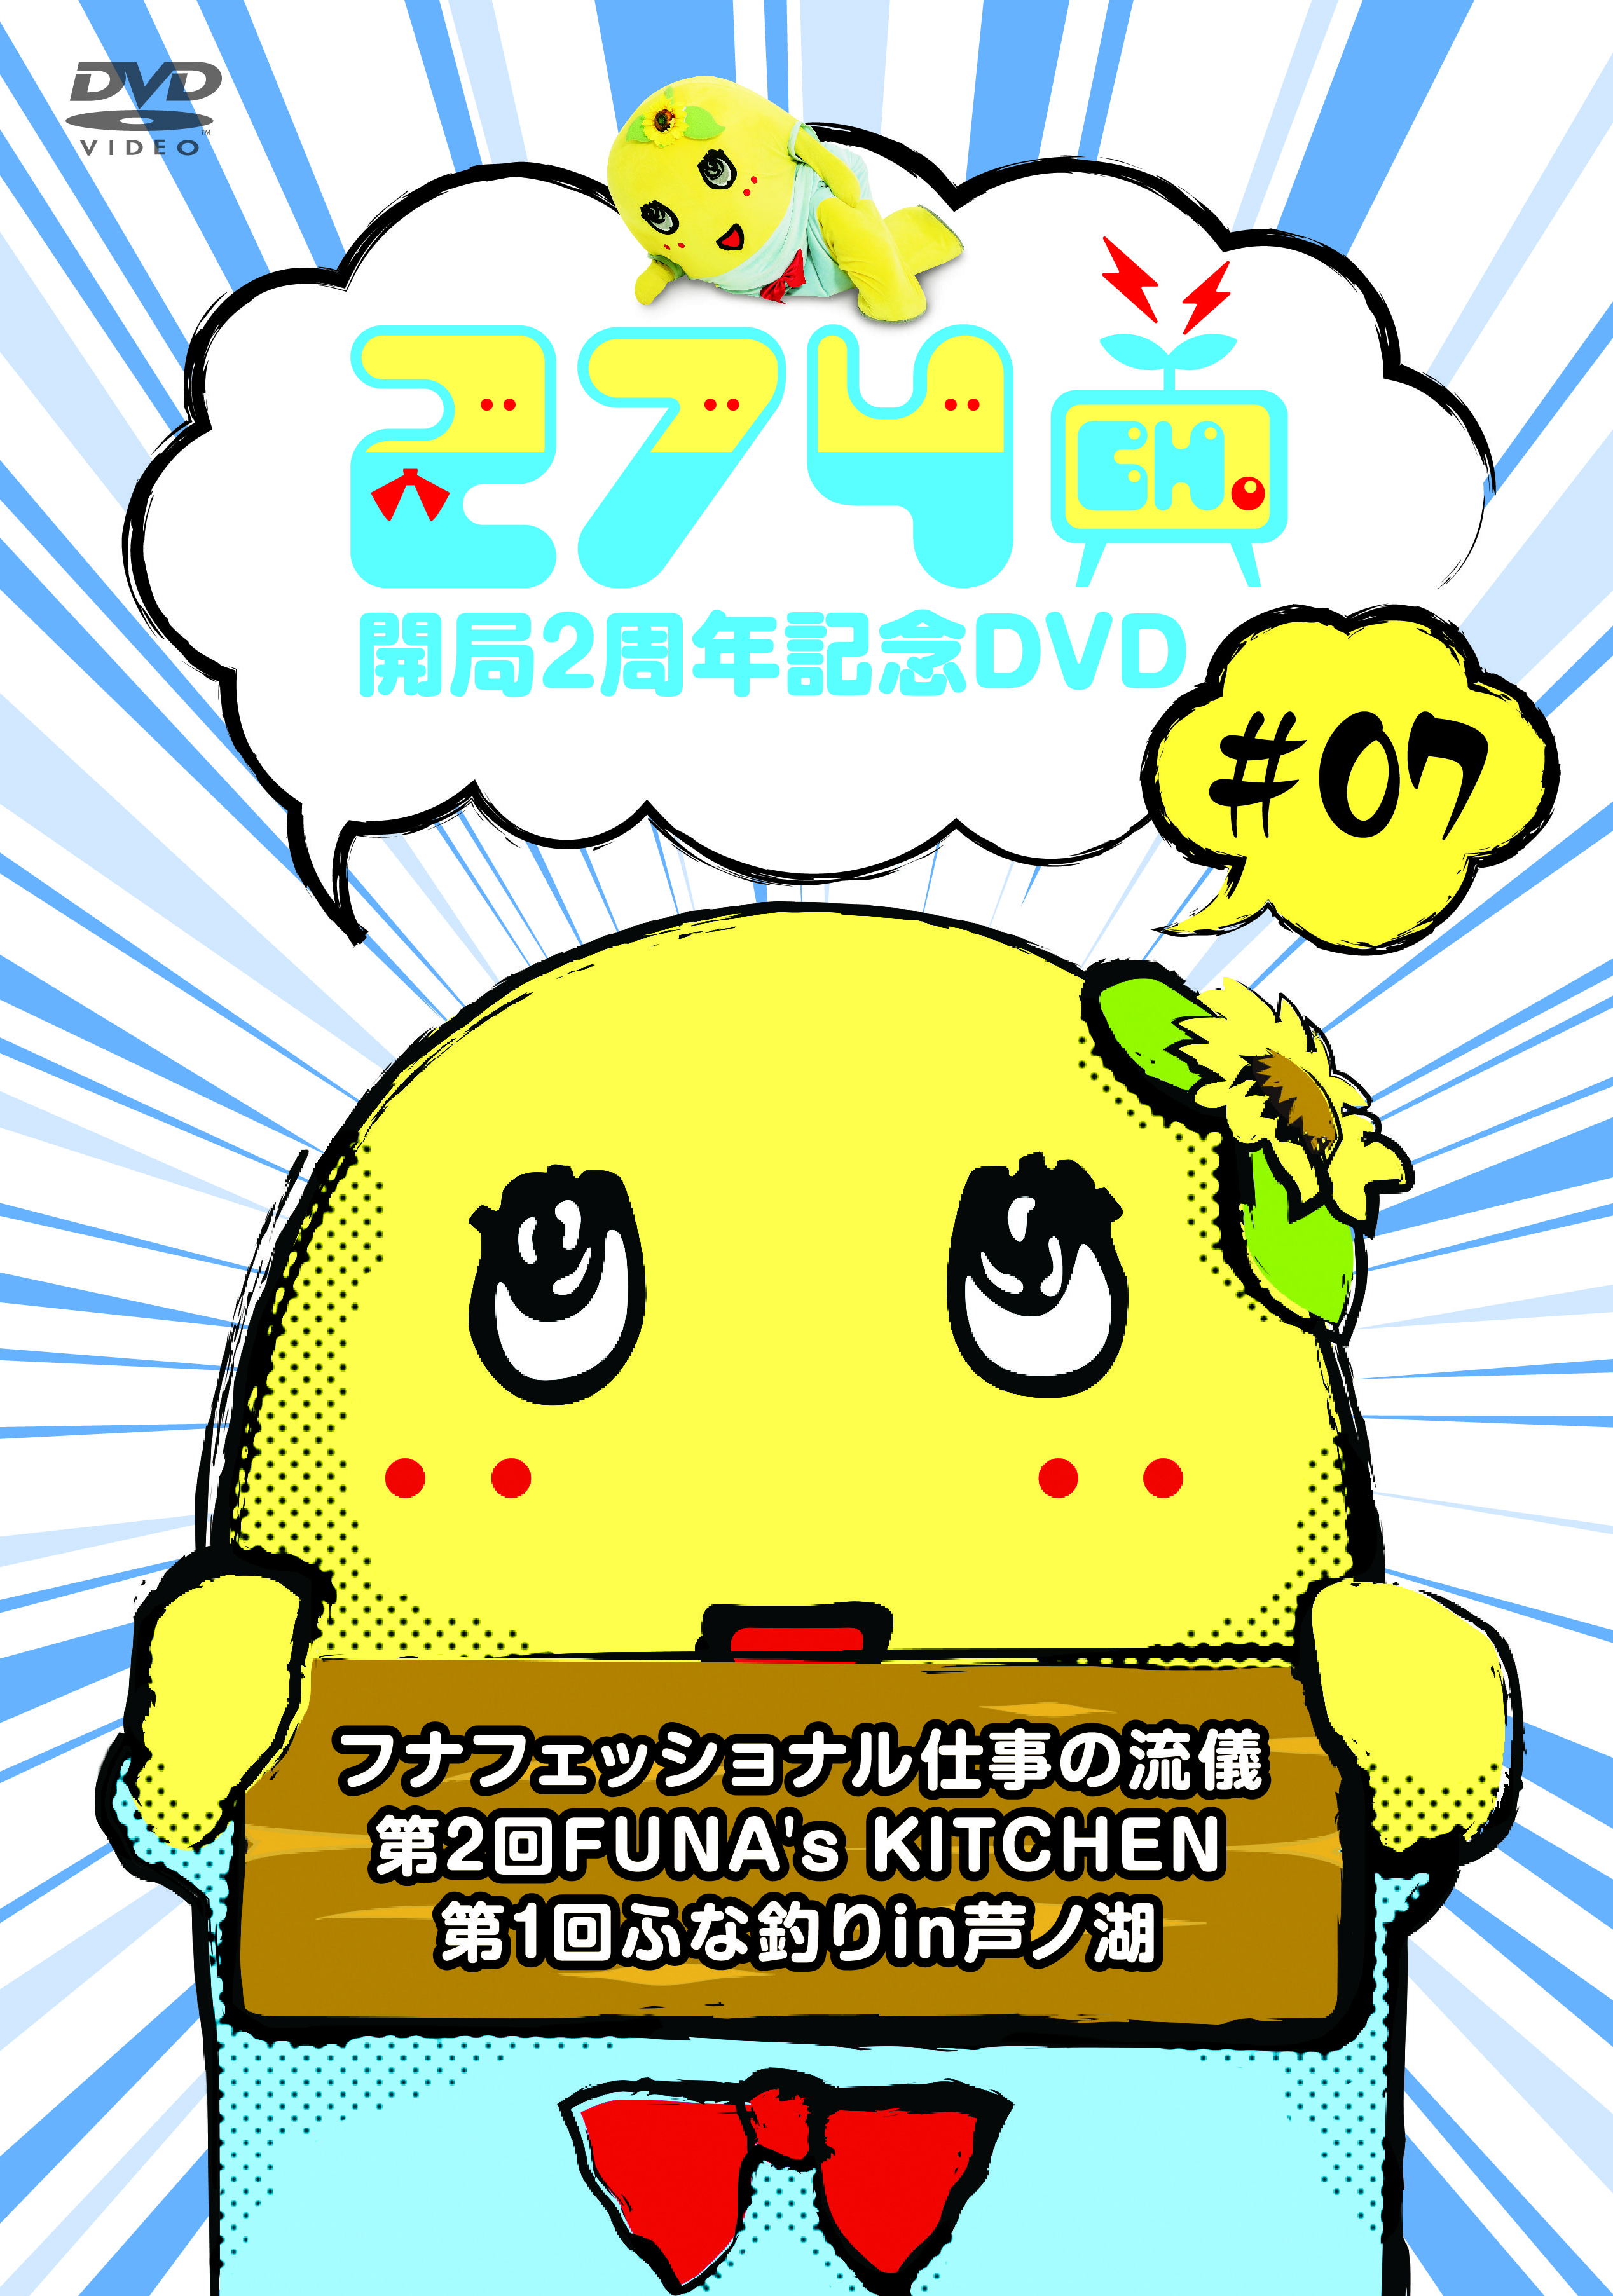 274ch. 開局2周年記念DVD#7「フナフェッショナル　仕事の流儀/第2回FUNA's KITCHEN/第1回ふな釣り in芦ノ湖」